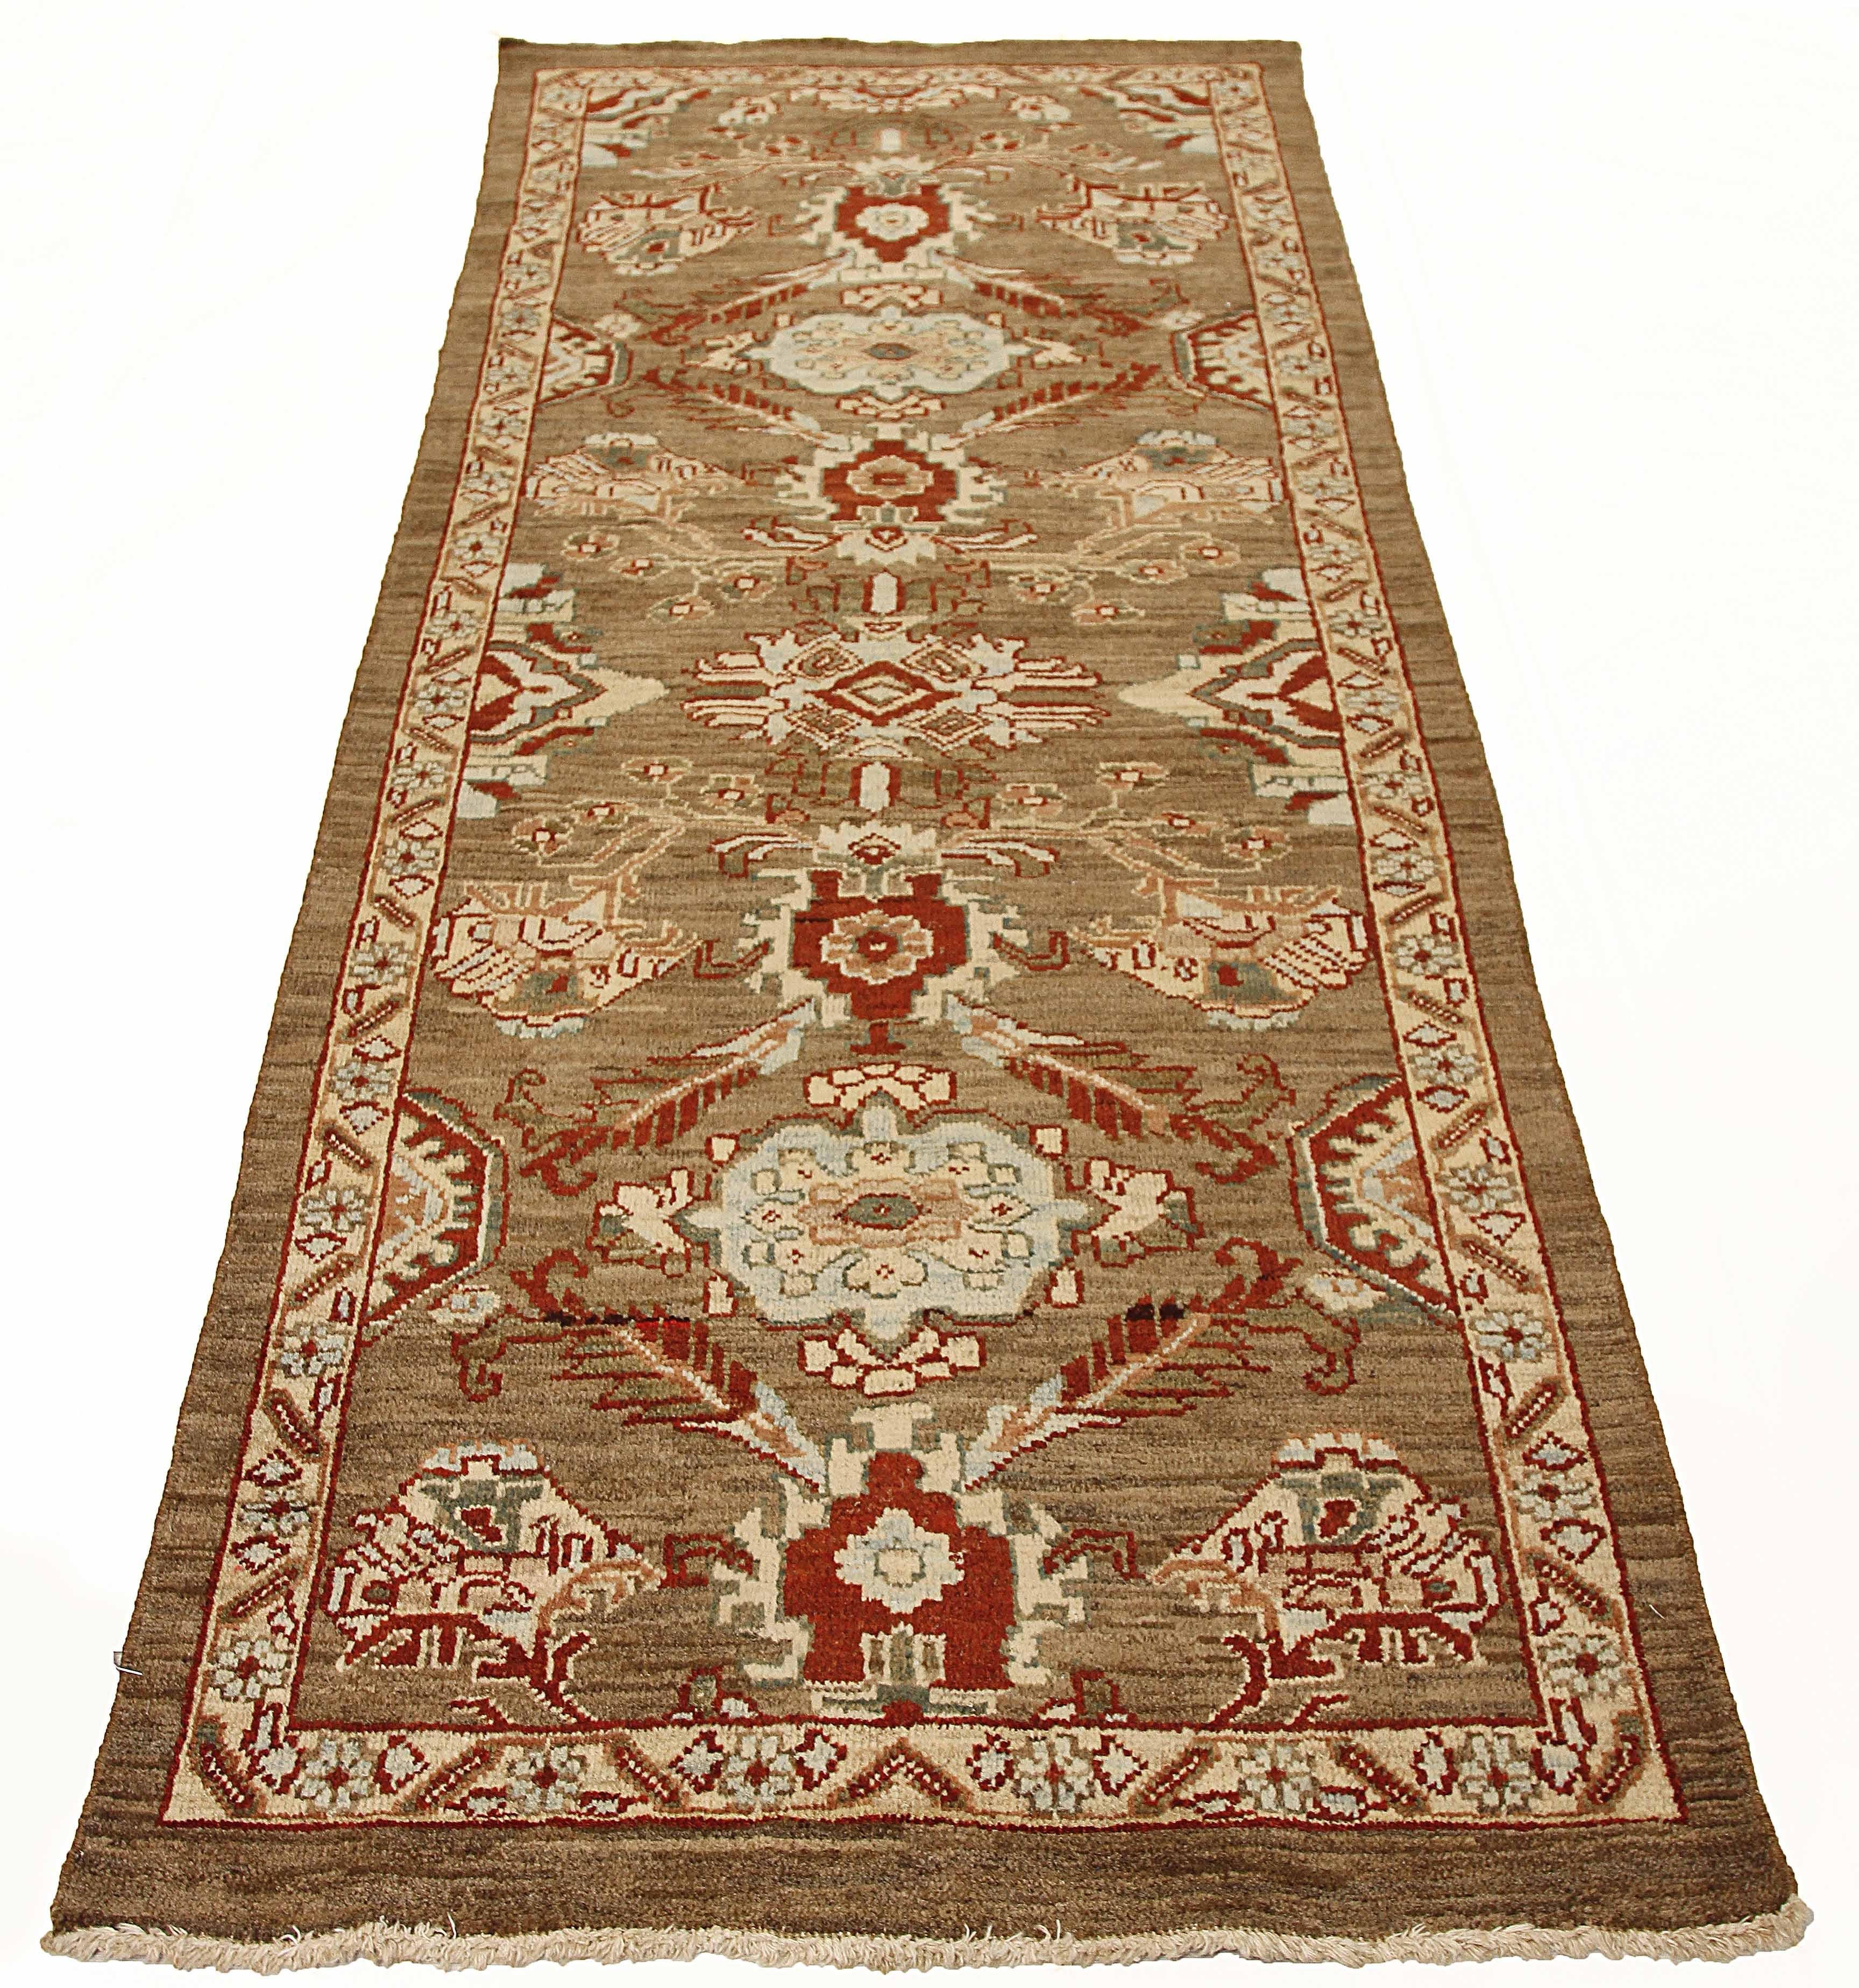 Contemporary Turkish runner rug made of handwoven sheep’s wool of the finest quality. It’s colored with organic vegetable dyes that are certified safe for humans and pets alike. It features flower details in red and blue all-over associated with